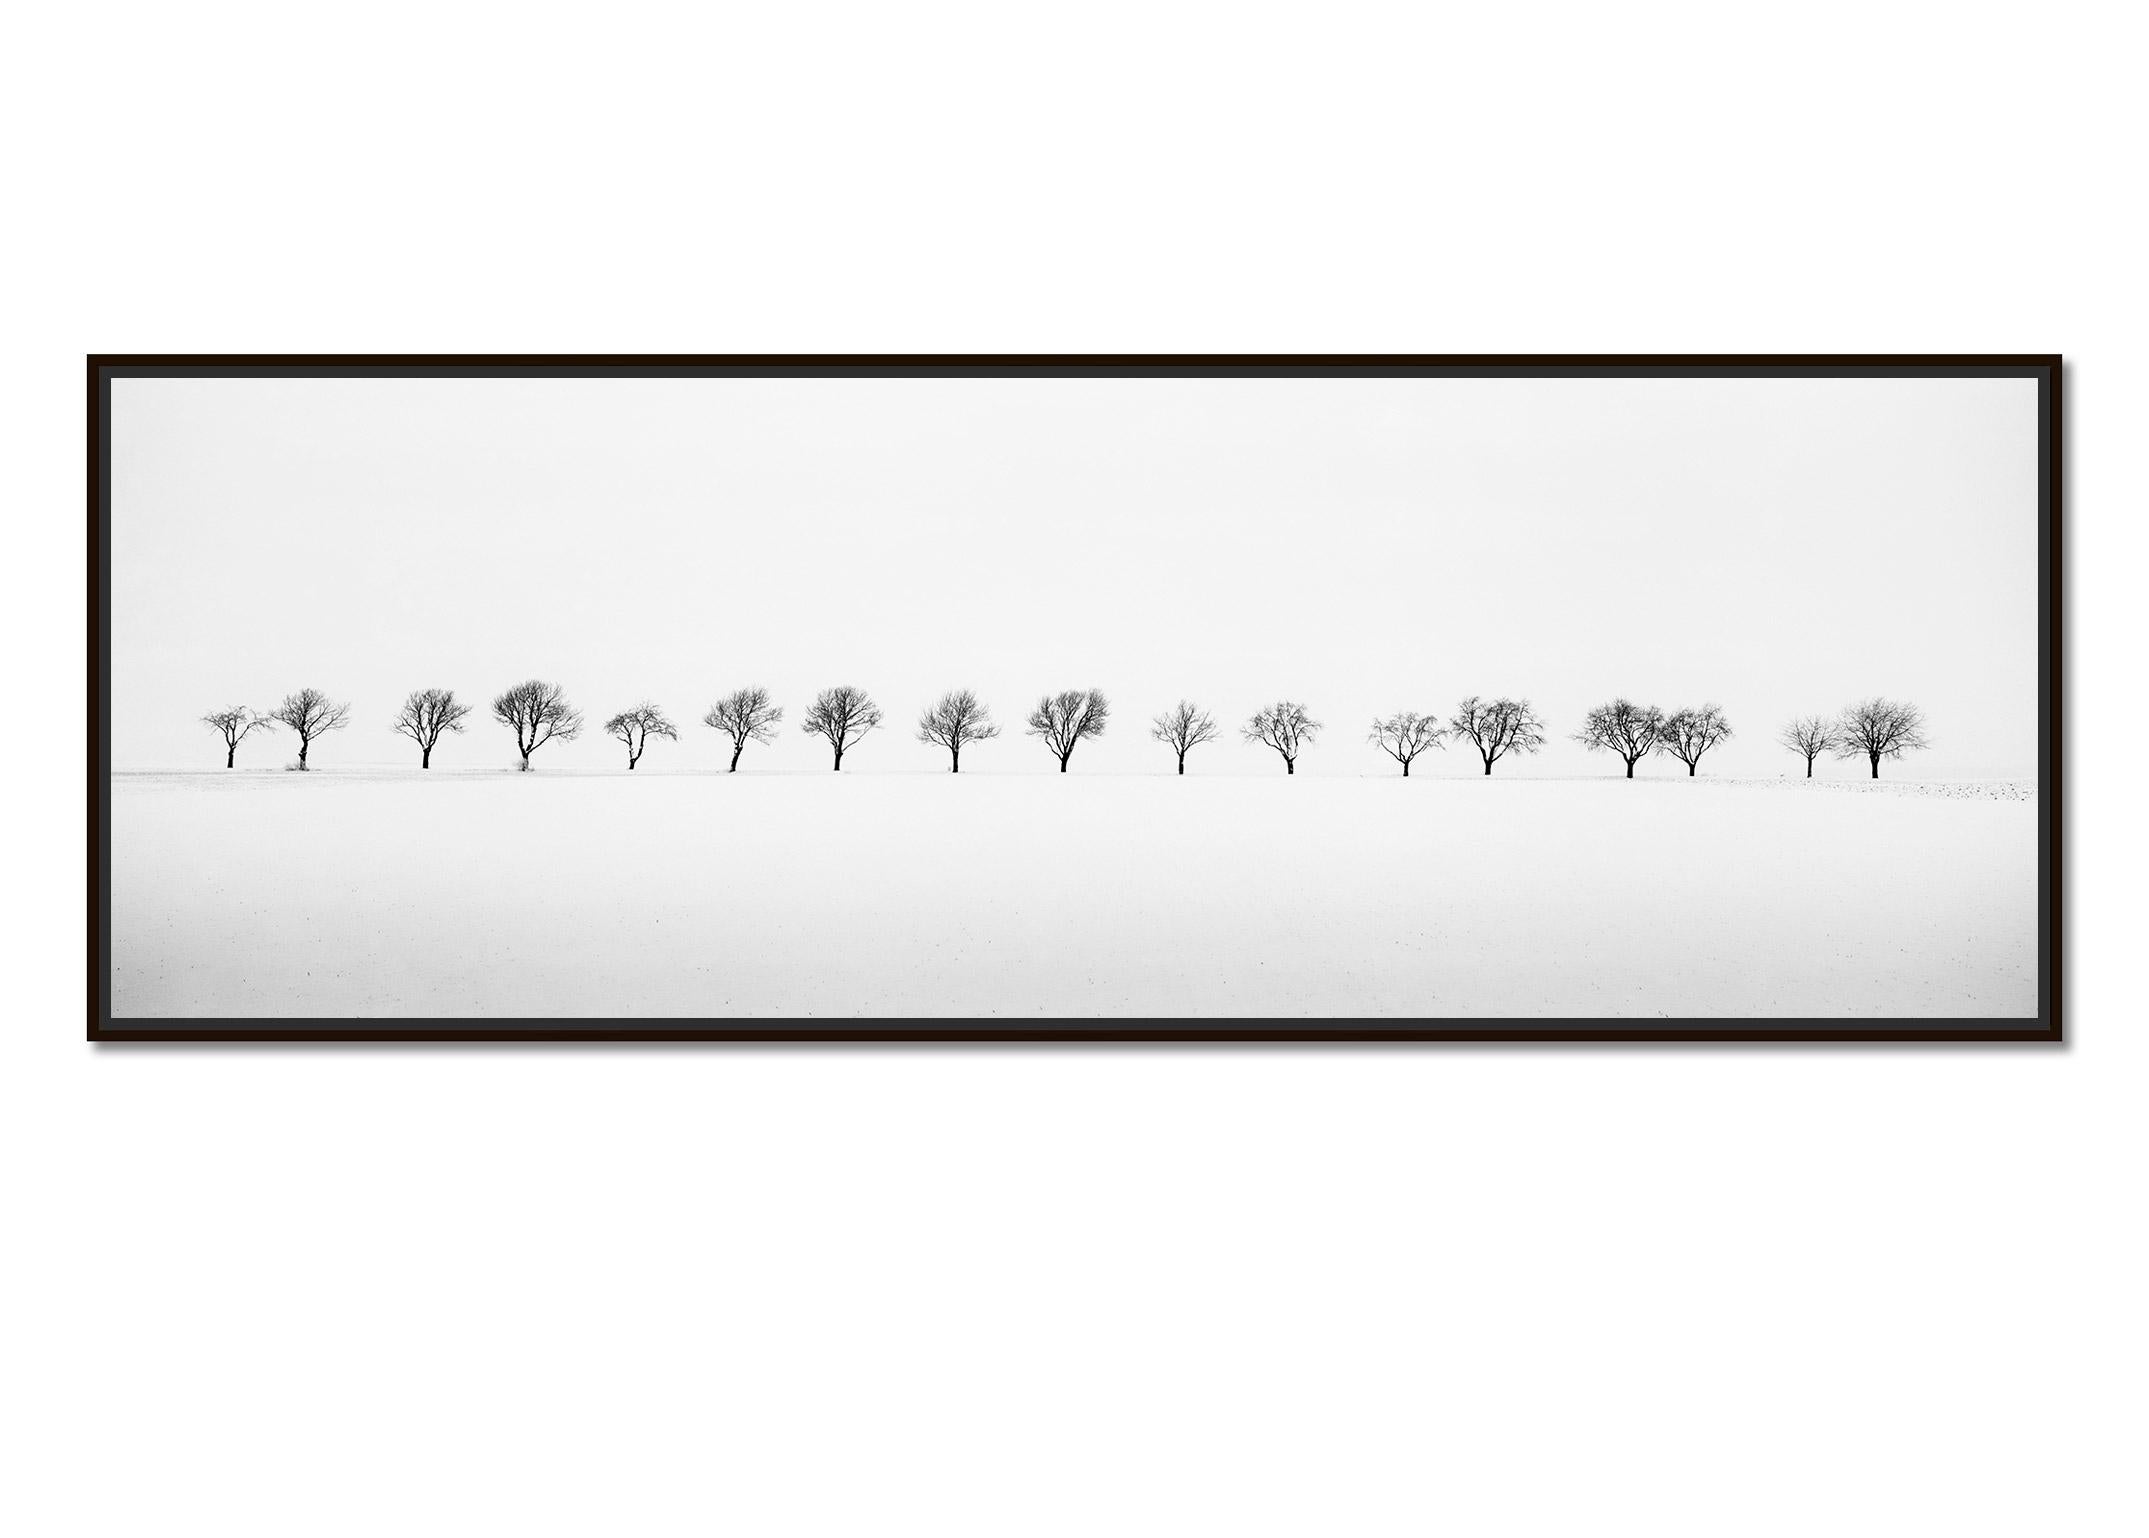 Cherry Trees in Snow Field, minimalist black and white photography, landscape - Photograph by Gerald Berghammer